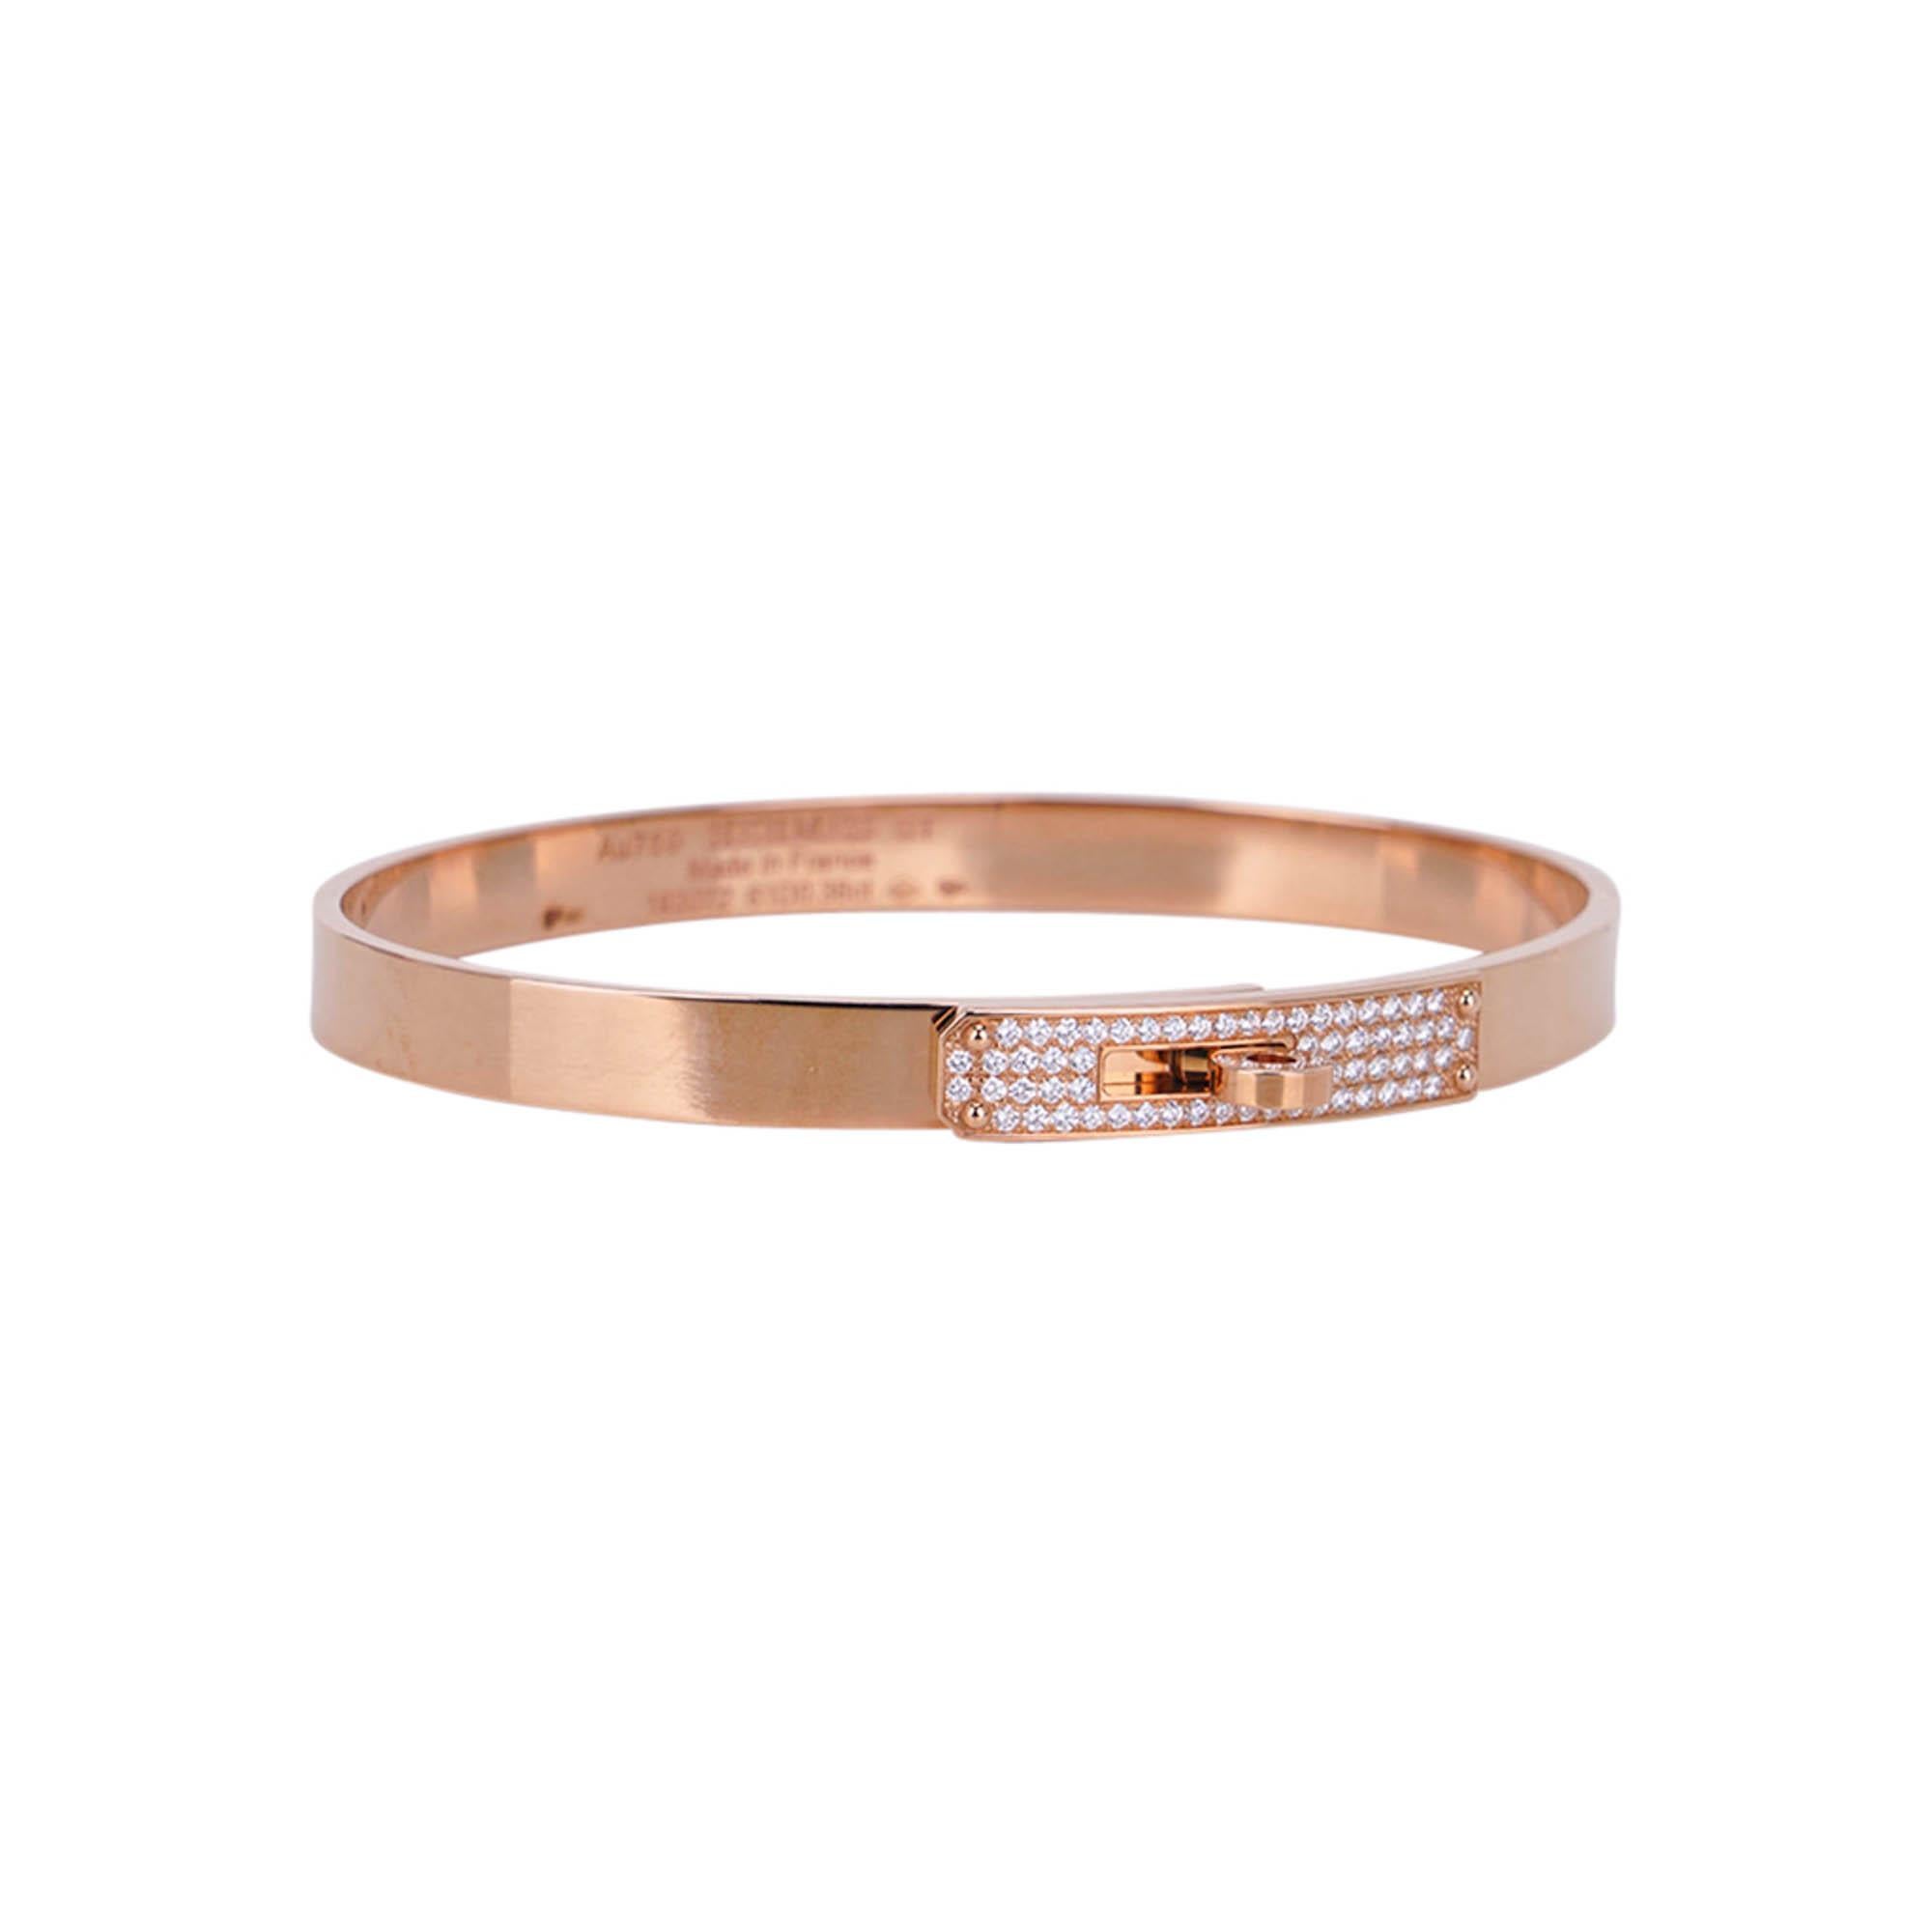 Mightychic offers a chic and instantly recognizable Hermes Kelly Bracelet Small Model.
Iconic bracelet with turn clasp featured in 18k rose gold and set with 61 diamonds.
Total carat weight is .36.
Perfect for everyday wear paired with everything